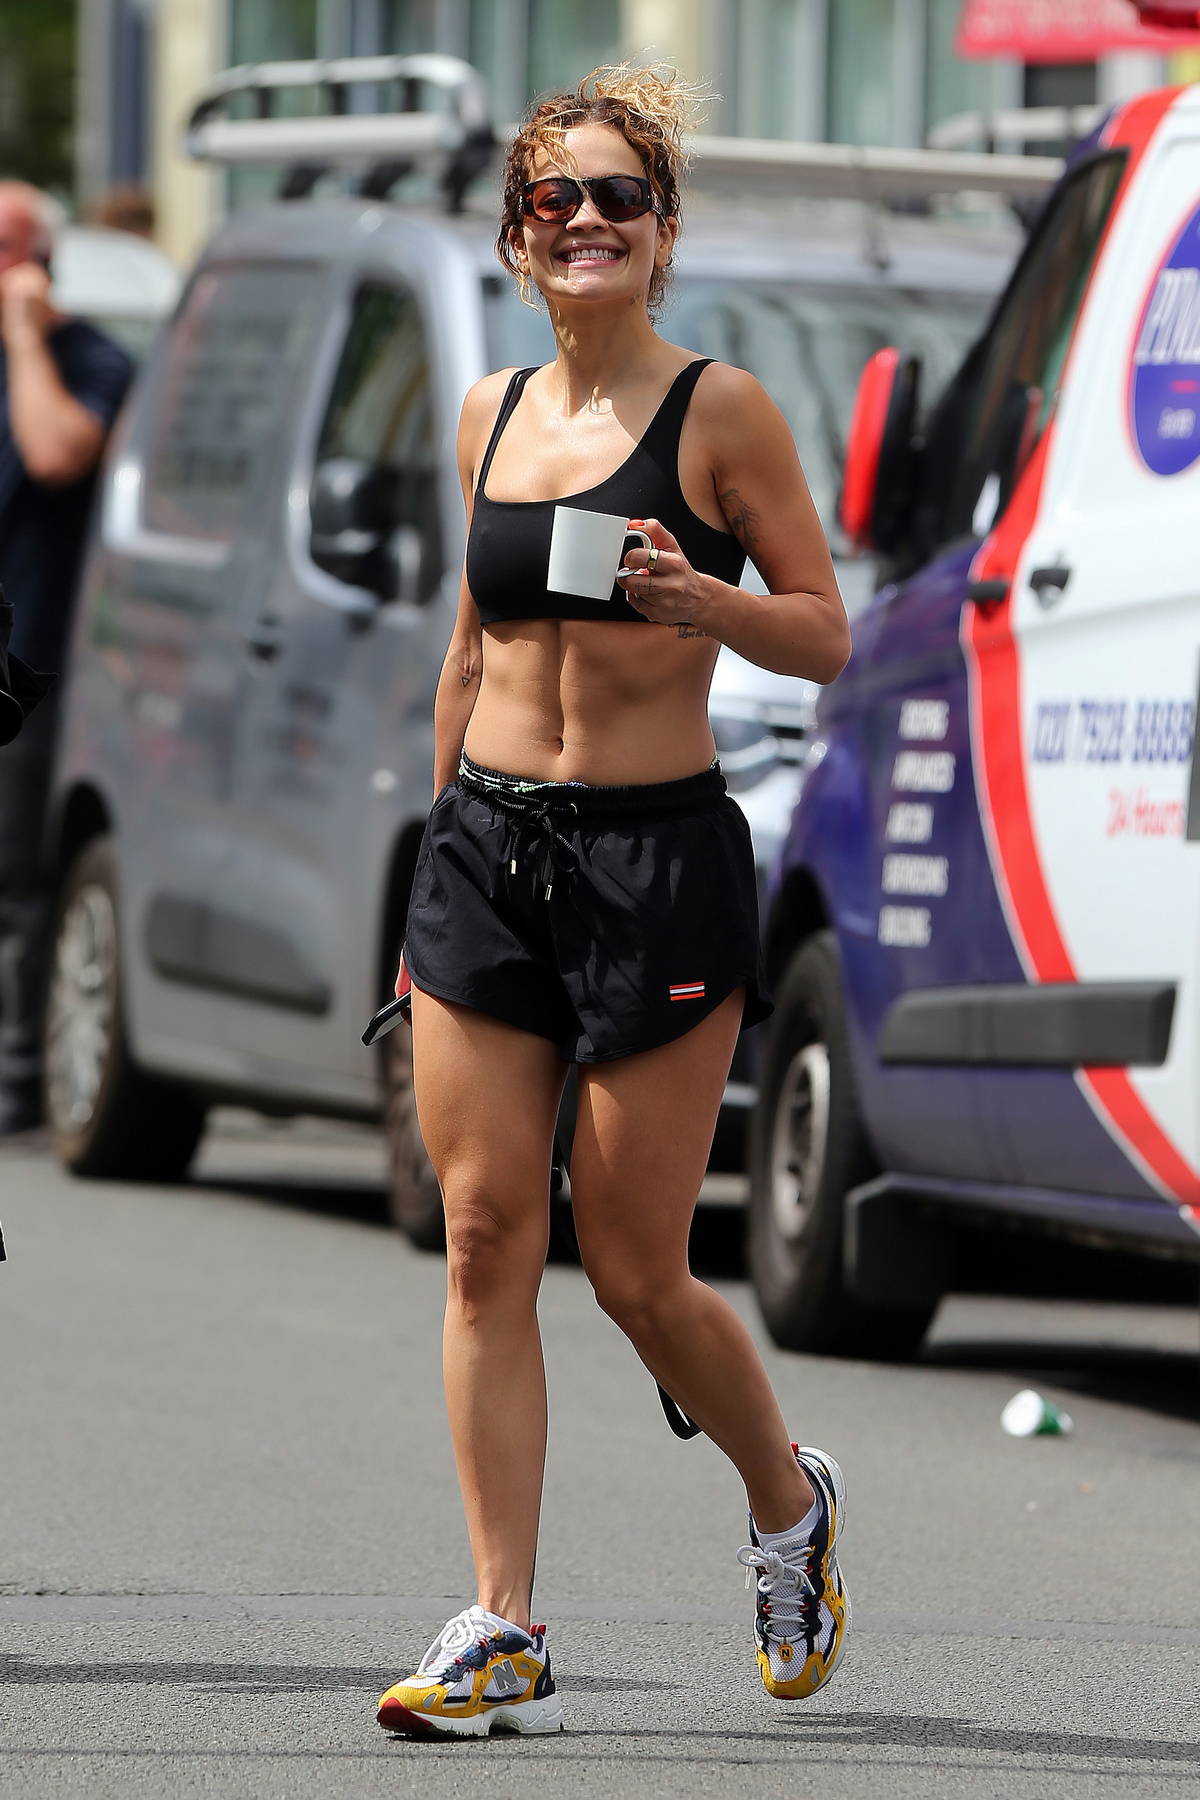 Rita Ora showcases her amazing abs in a black sports bra and